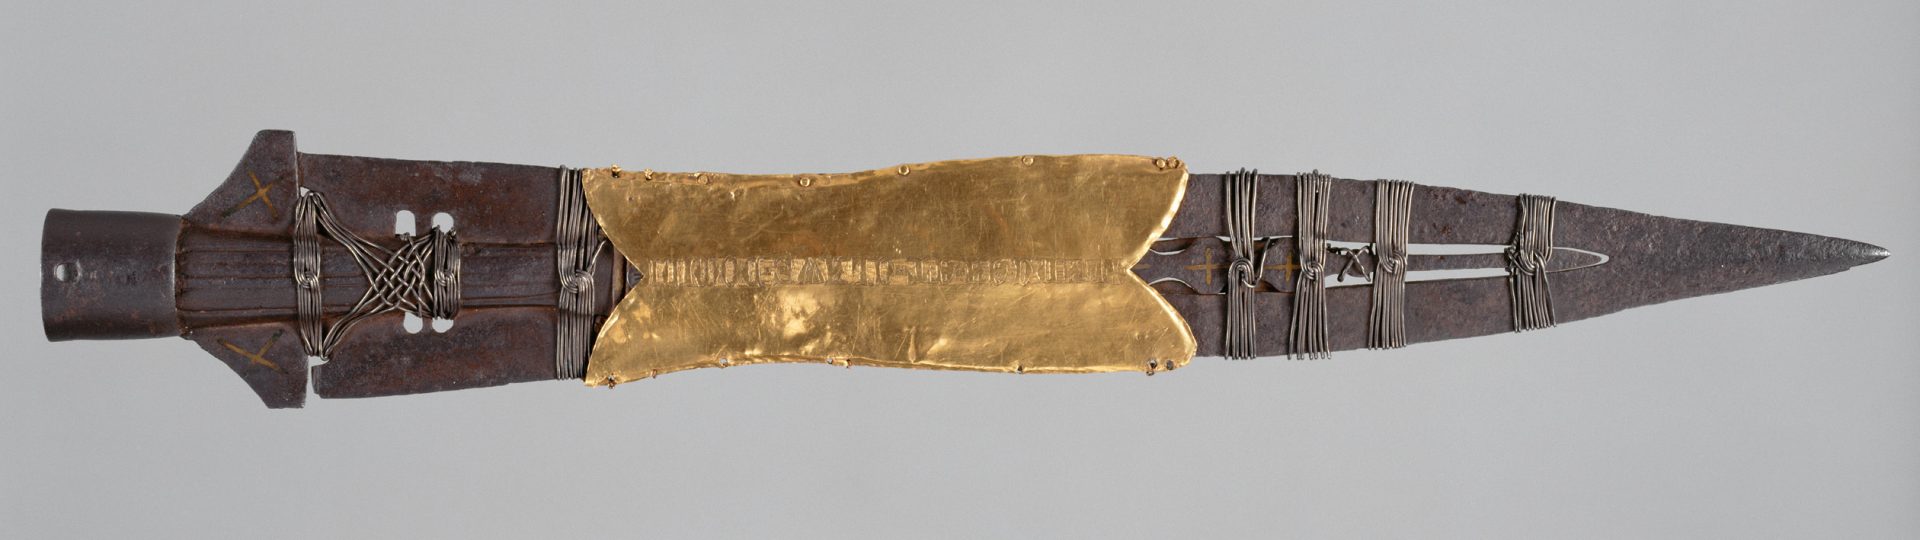 A photograph of an ancient lance head partially covered in gold.